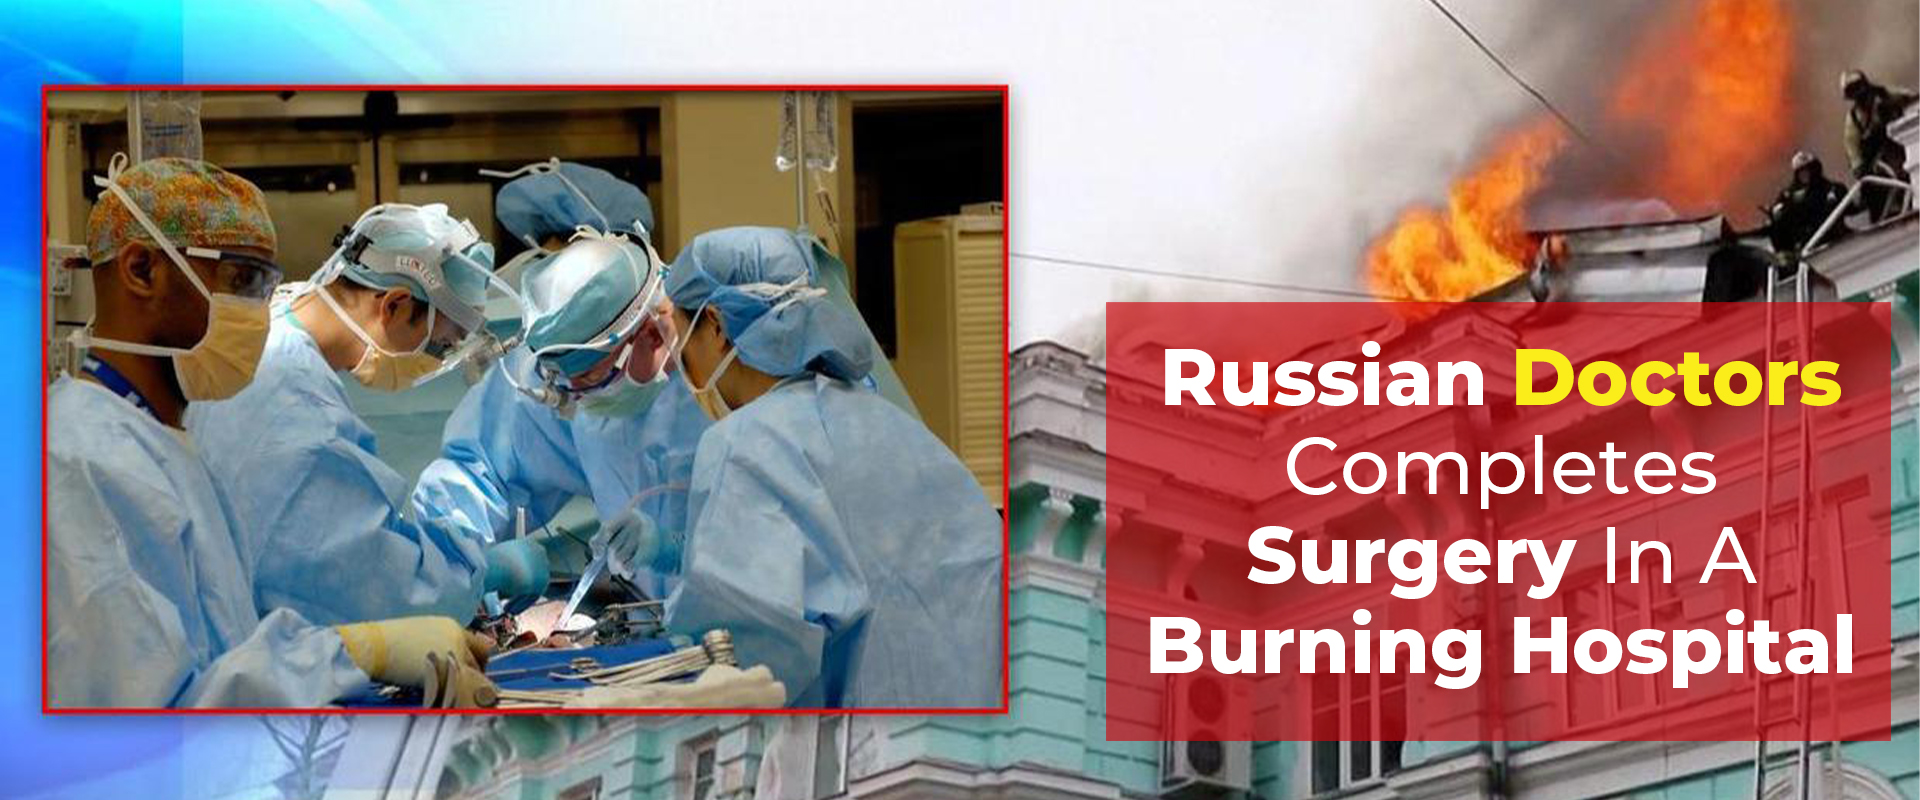 Doctors complete heart surgery as the Russian hospital burns